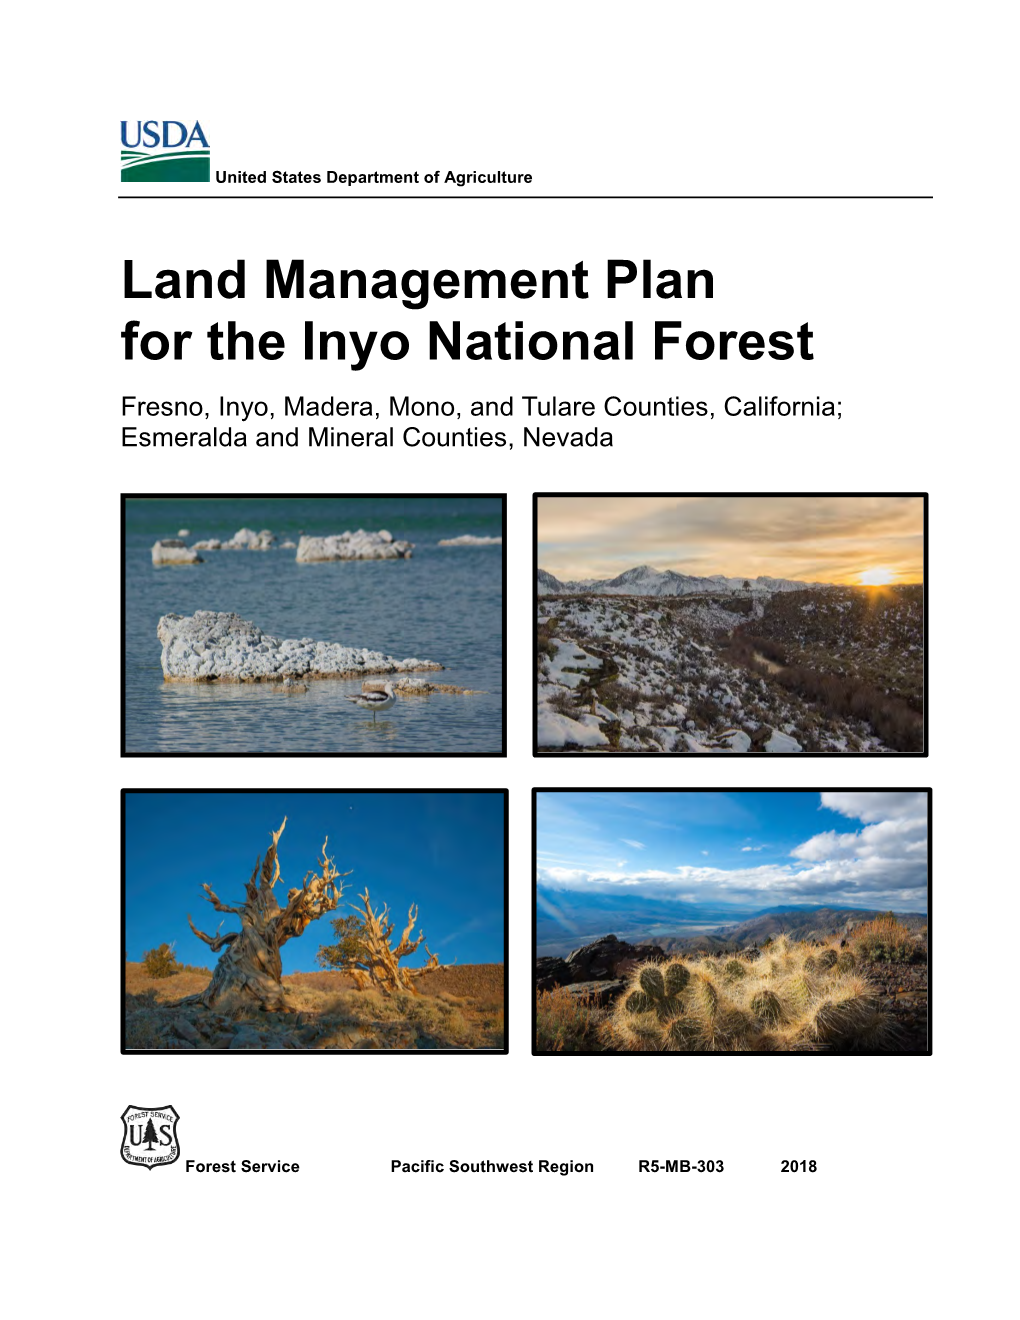 Revised Land Management Plan for the Inyo National Forest